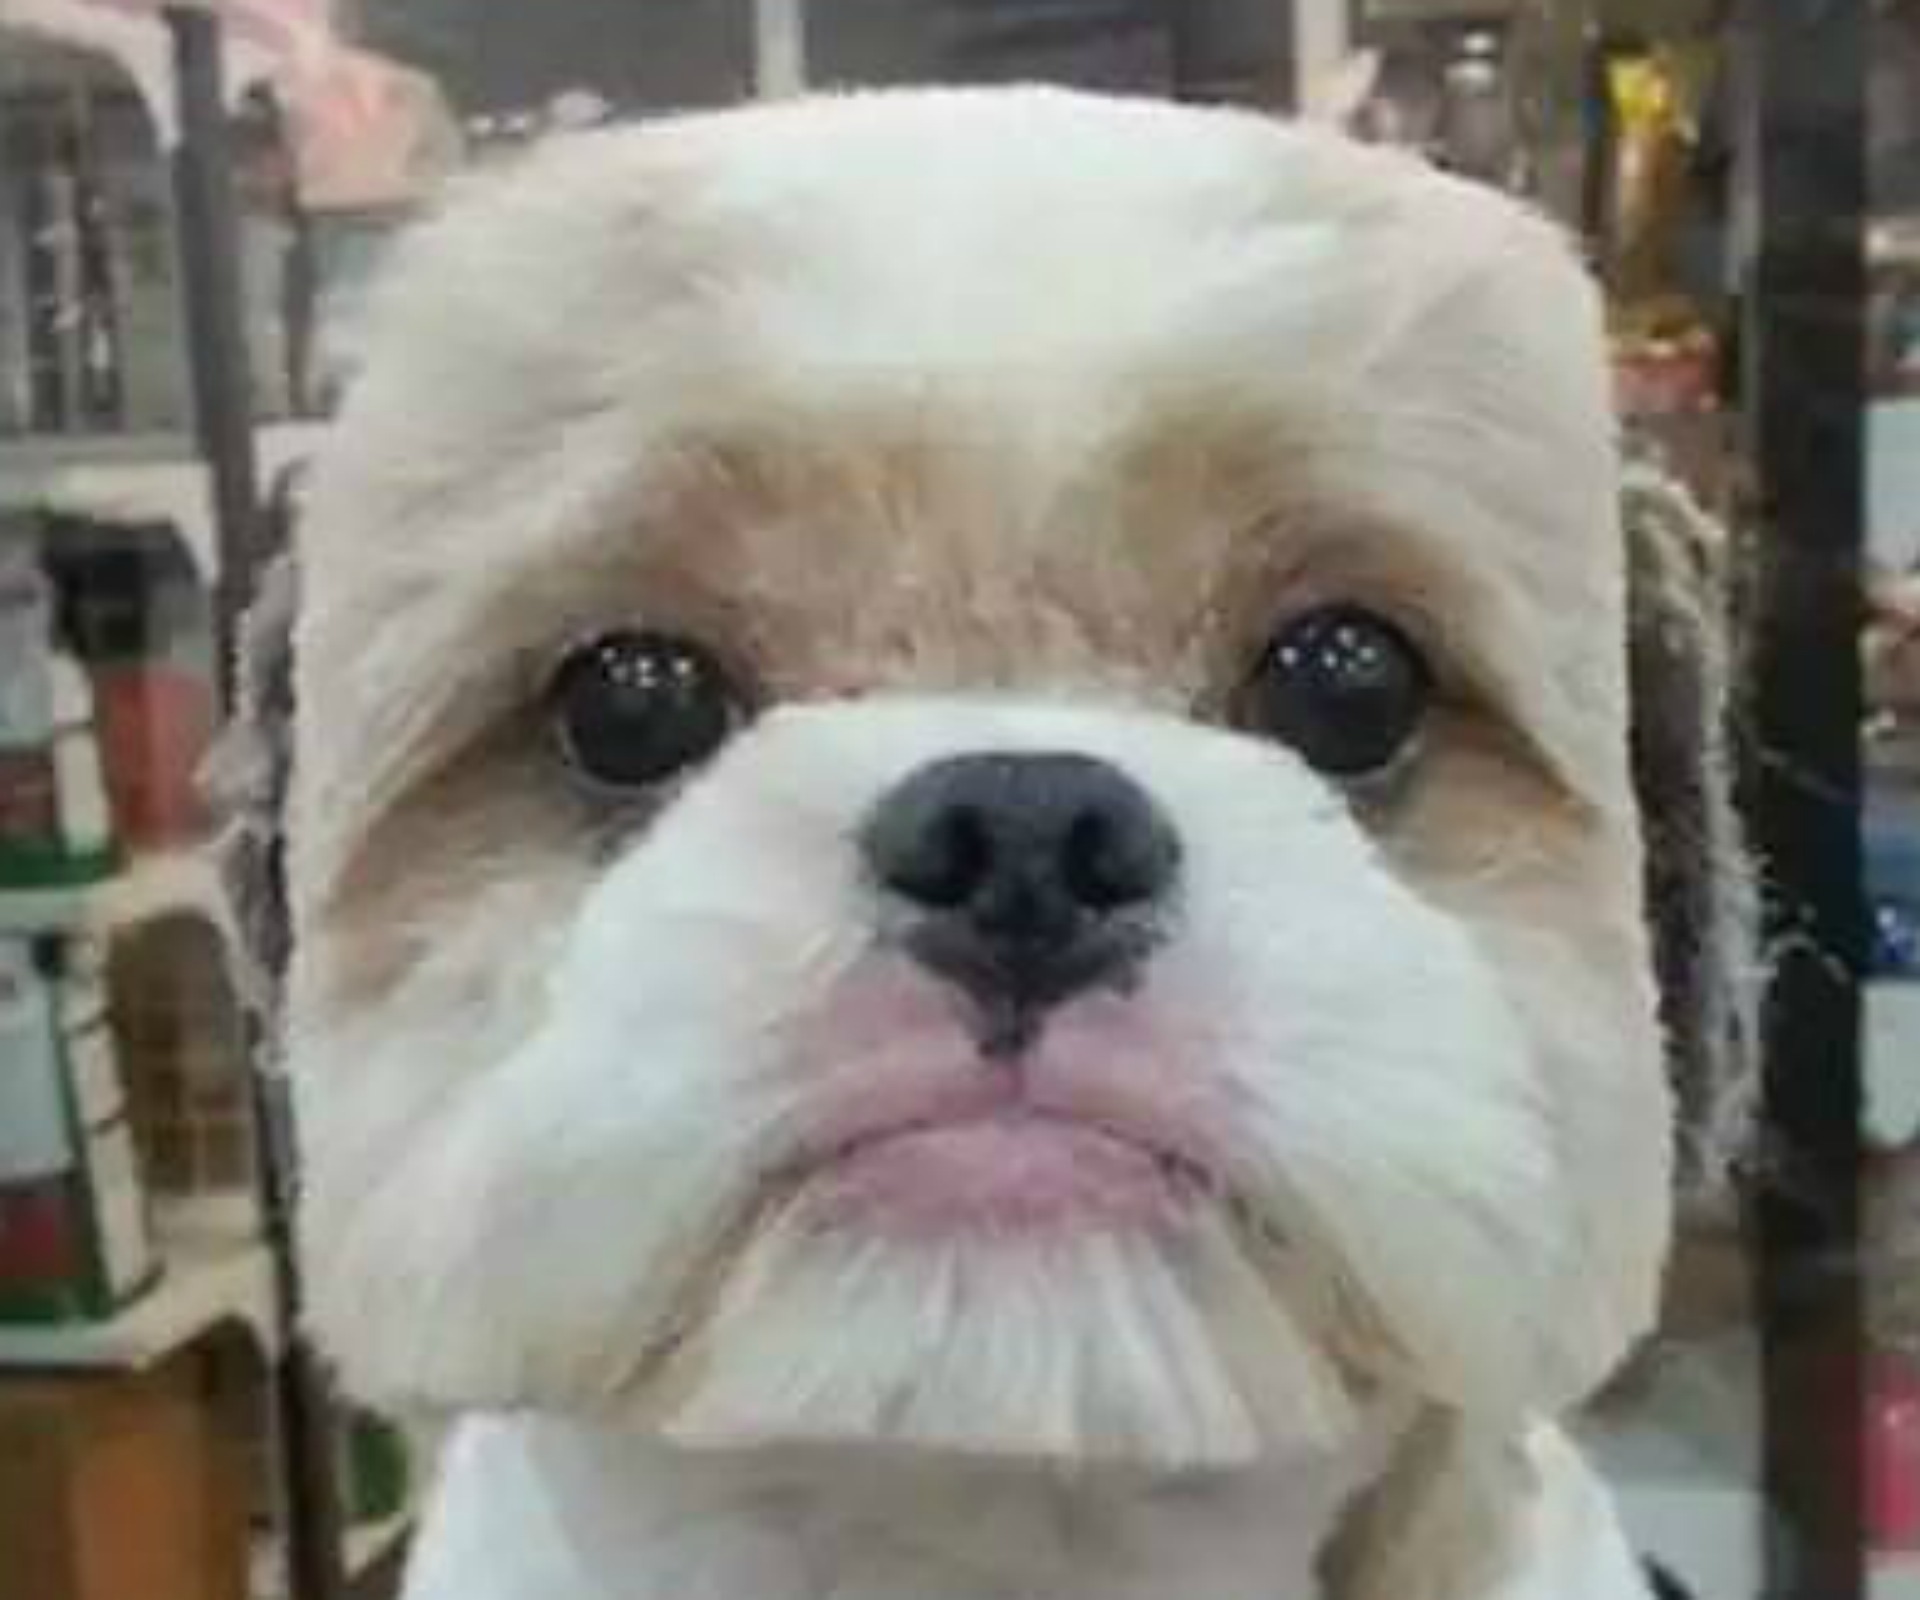 Cute or creepy? Pet owners are shaving puppy faces into cubes